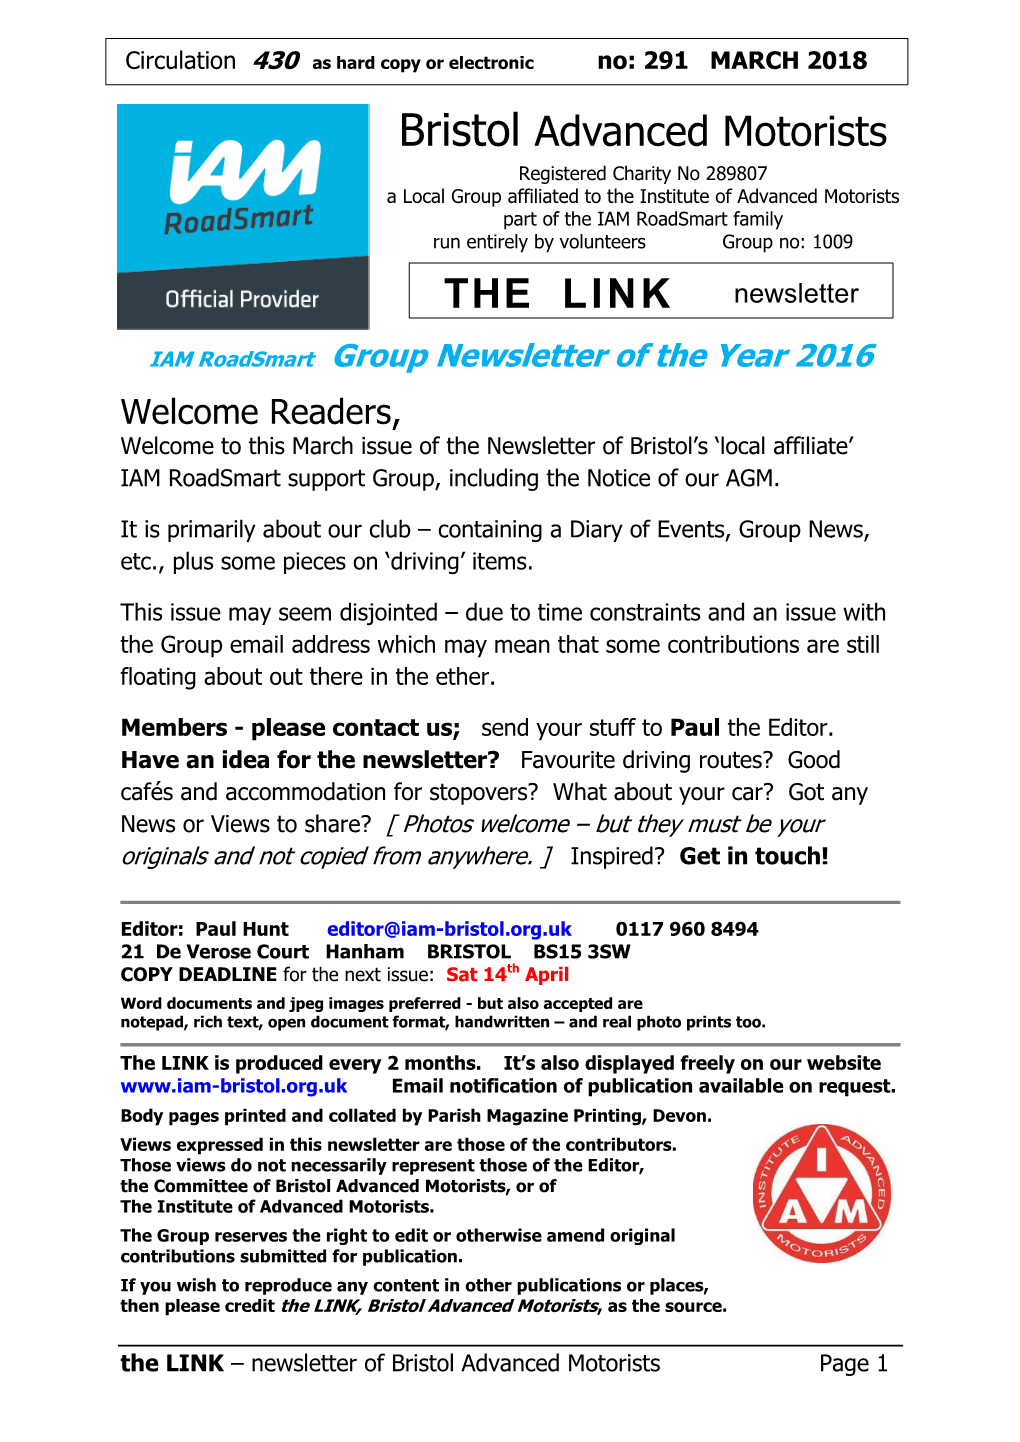 THE LINK Newsletter